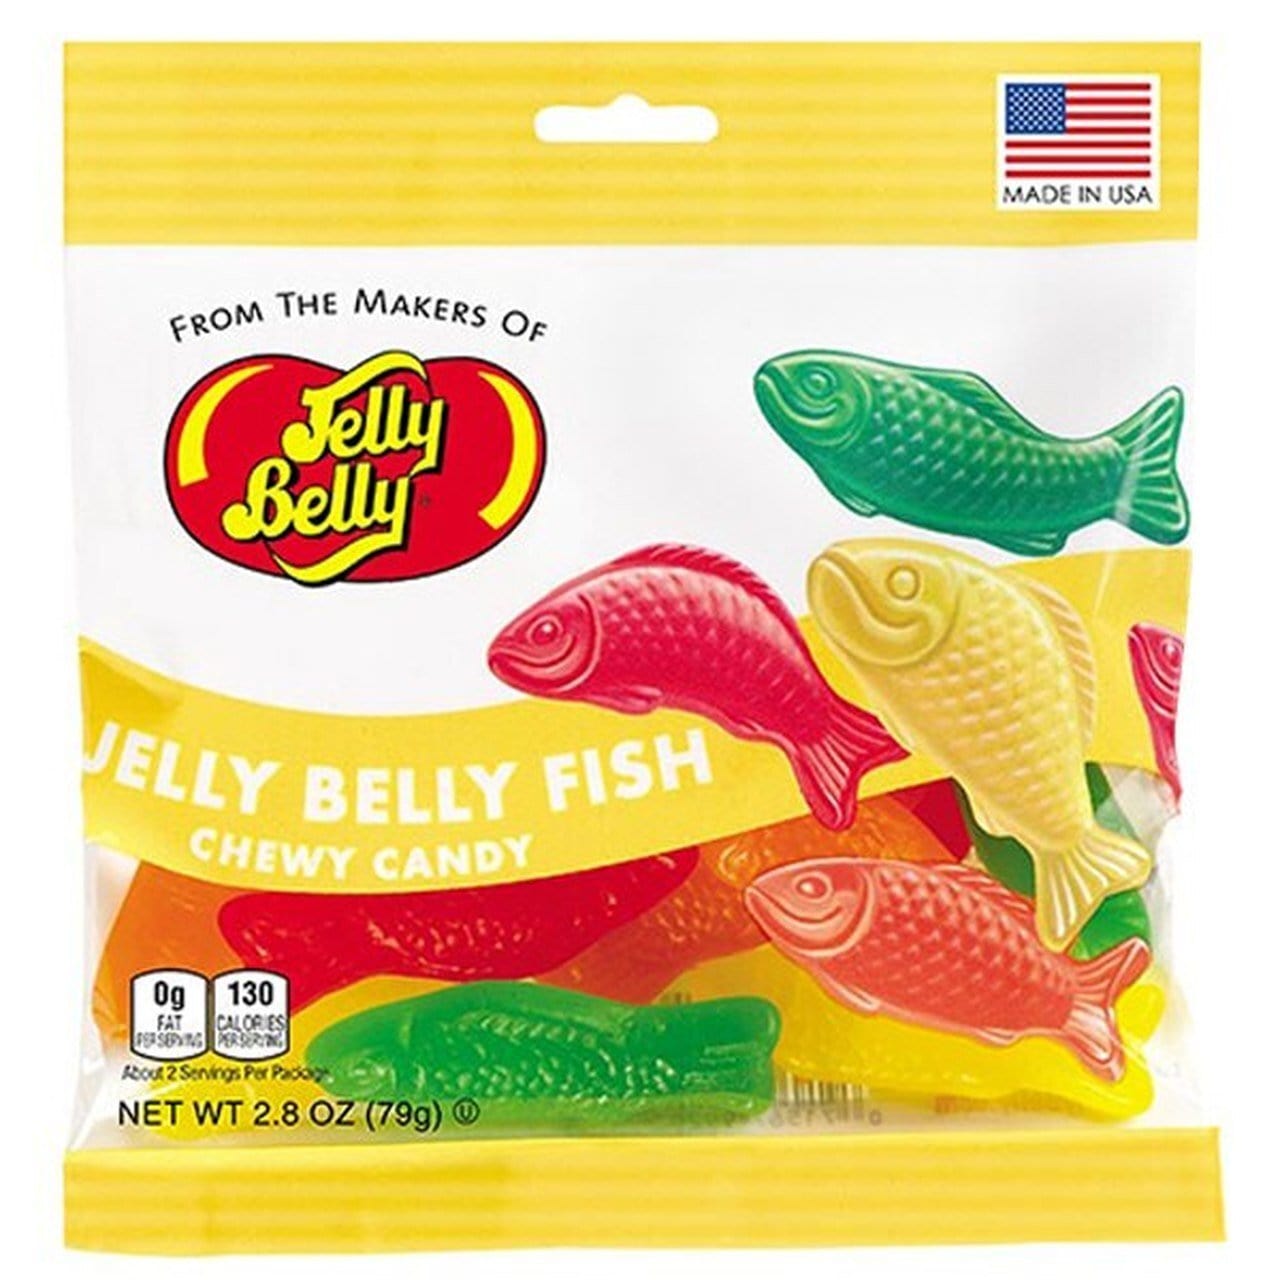 Jelly Belly Chewy Candy, Fish - 2.8 oz